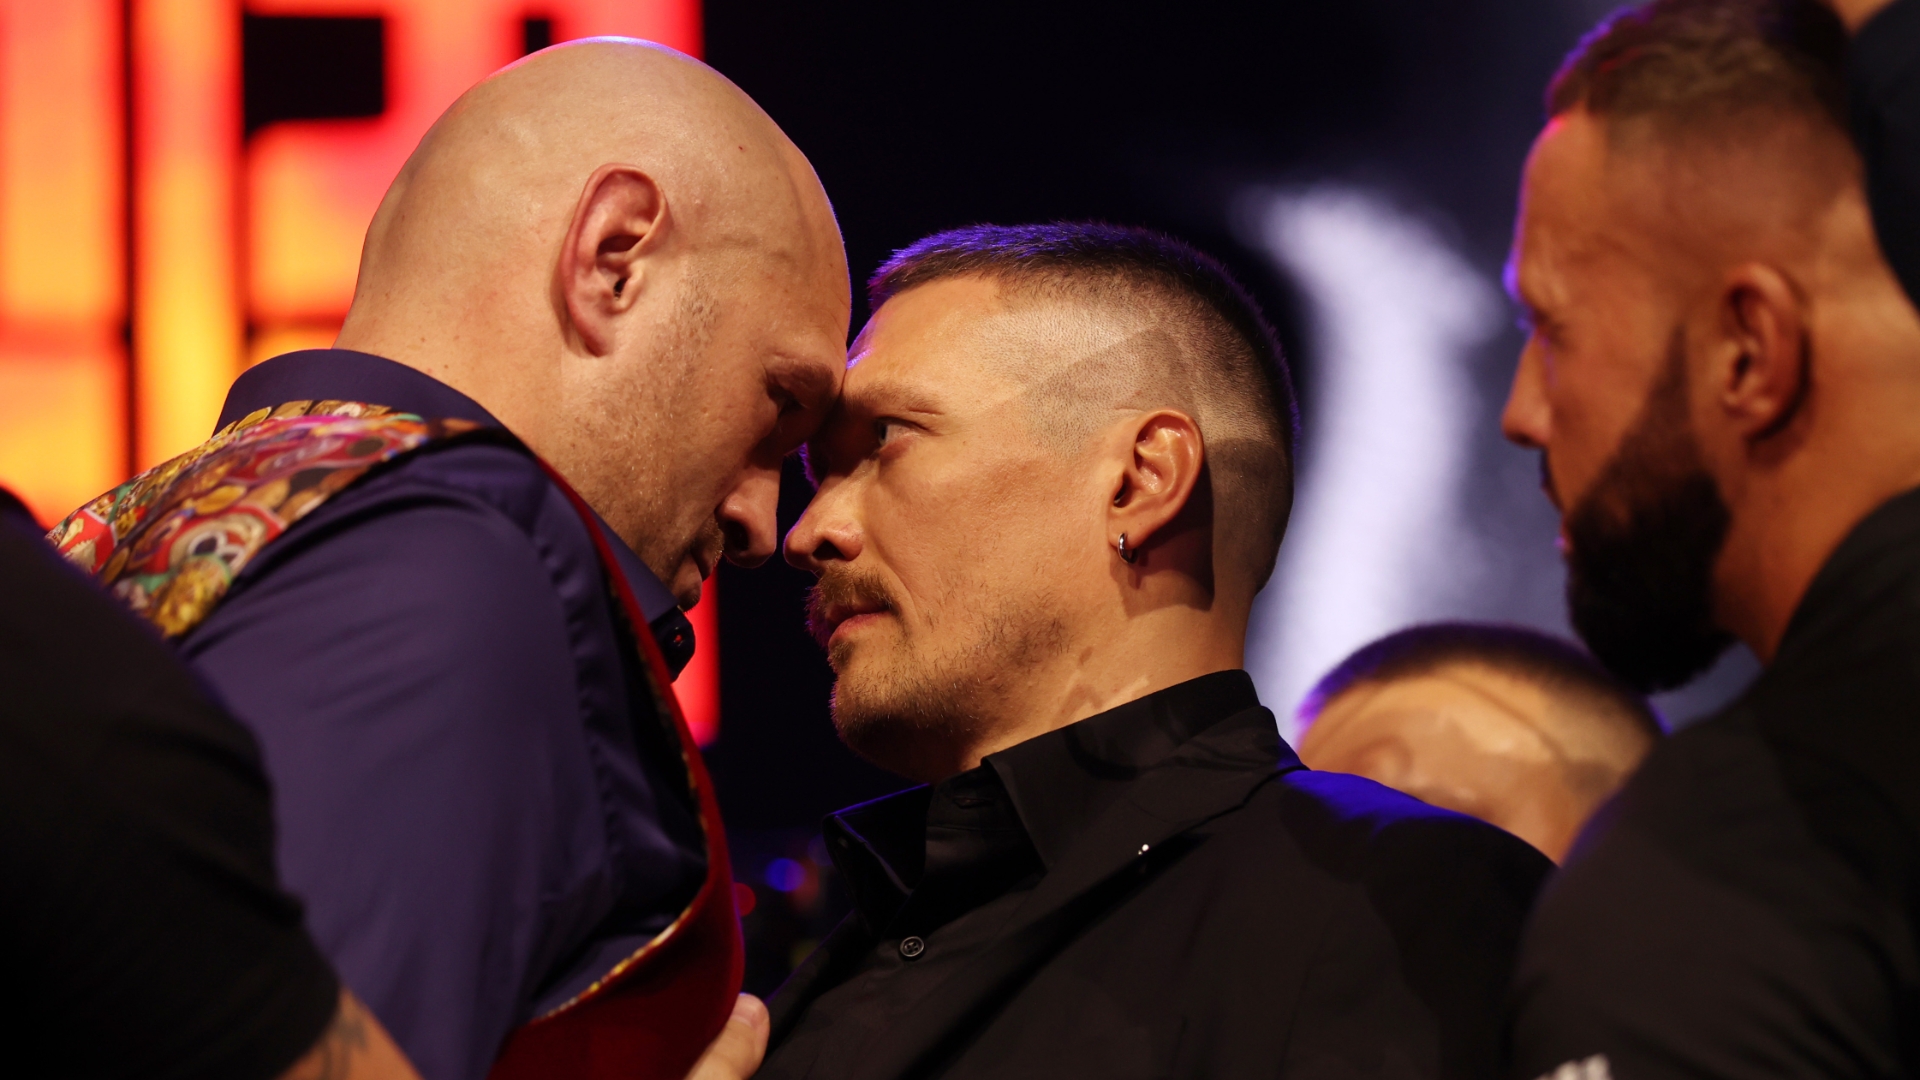 Fury-Usyk faceoff gets heated - Stream the Video - Watch ESPN